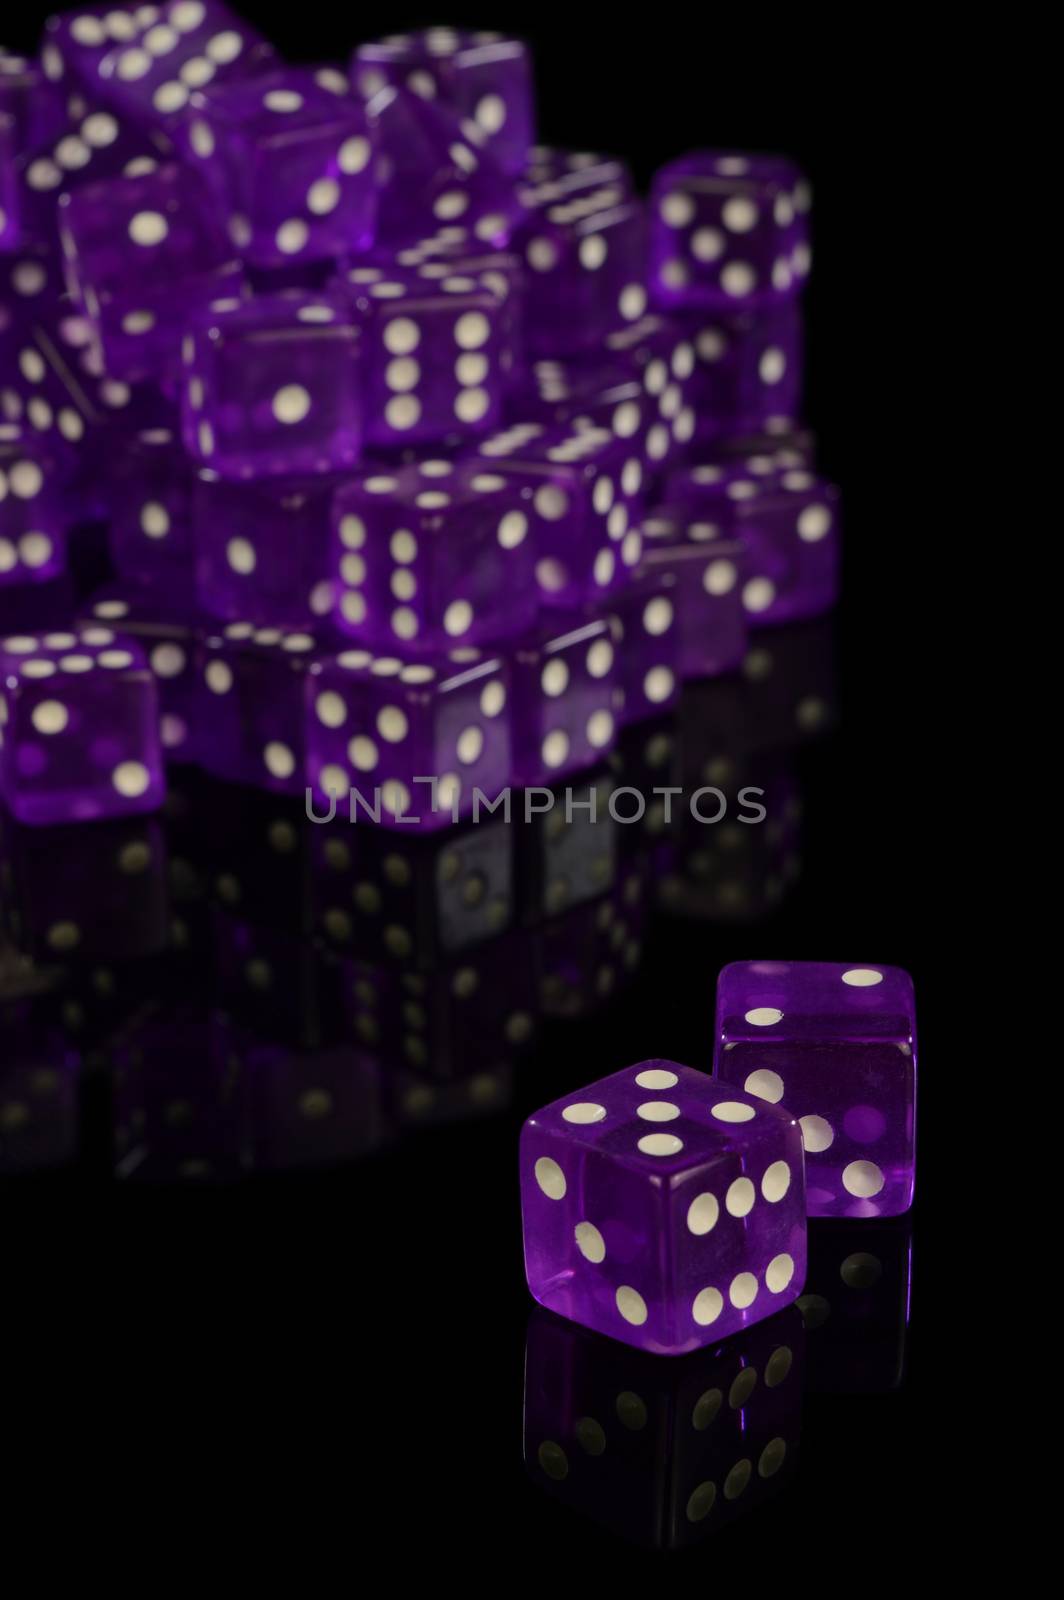 A pile of new unused Casino grade dice over a black reflective surface.